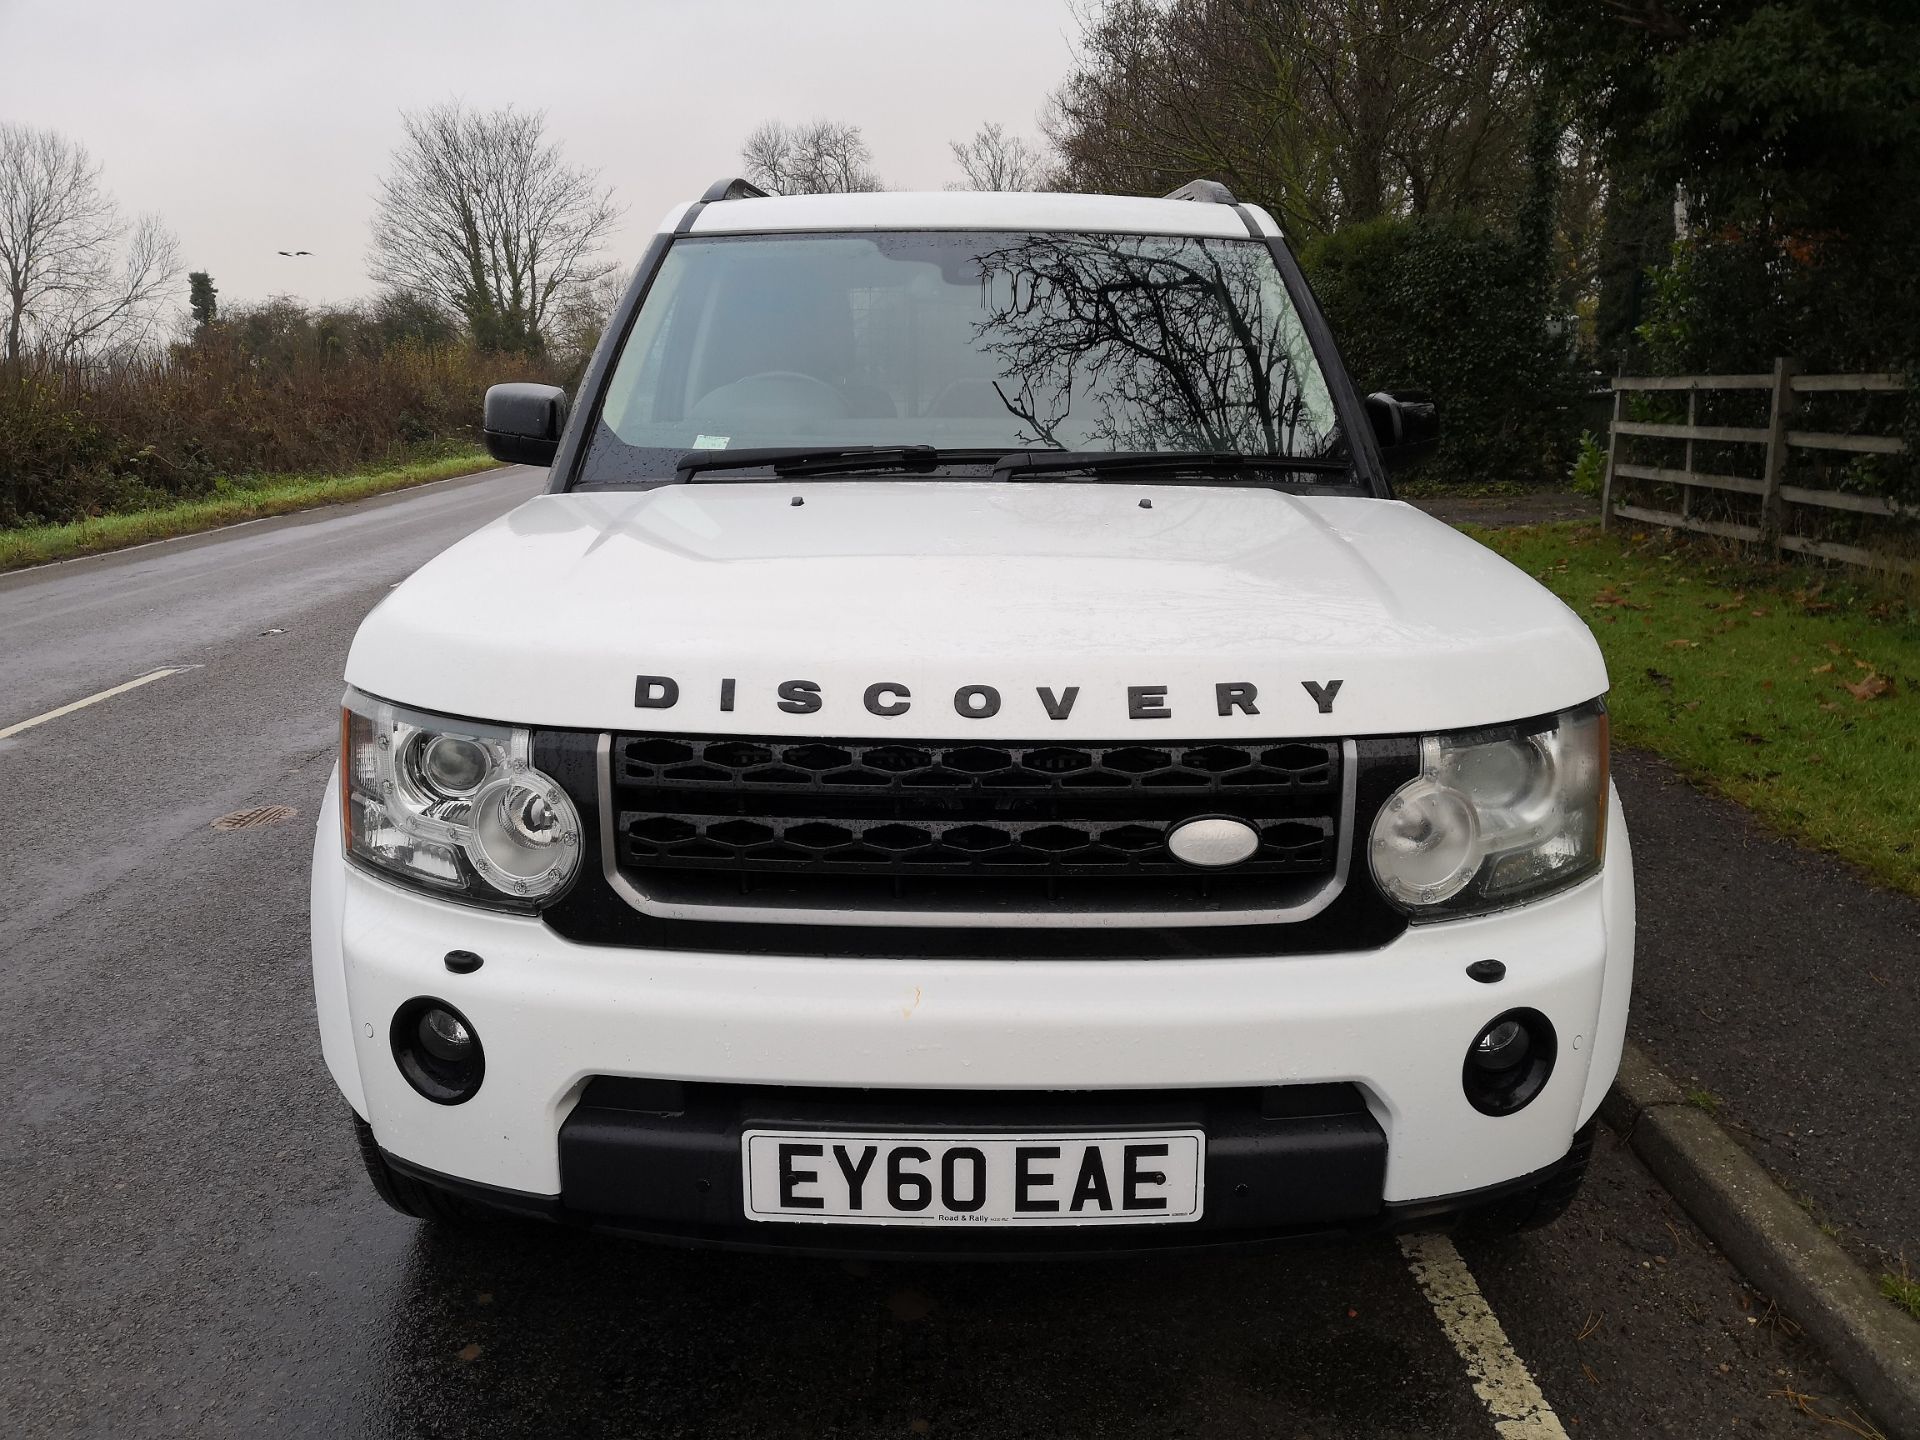 2011/60 REG LAND ROVER DISCOVERY 4 TDV6 AUTOMATIC WHITE COMMERCIAL DIESEL LIGHT 4X4 *PLUS VAT* - Image 2 of 19